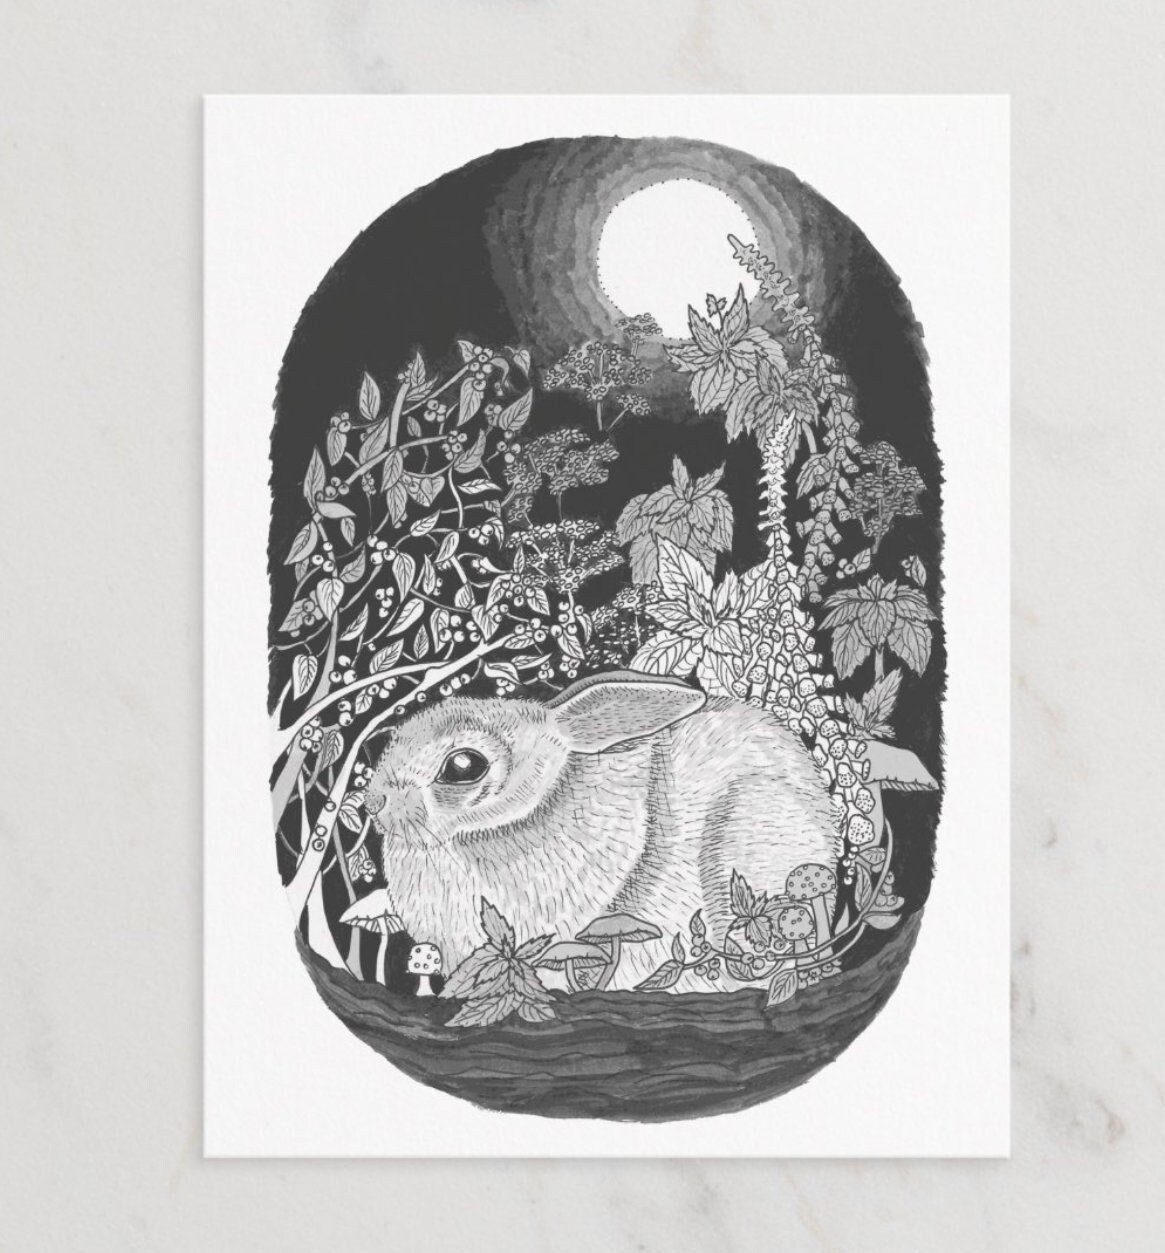 Easter Eggs/bunny Clear Stamps/card Making Transparent Stamping